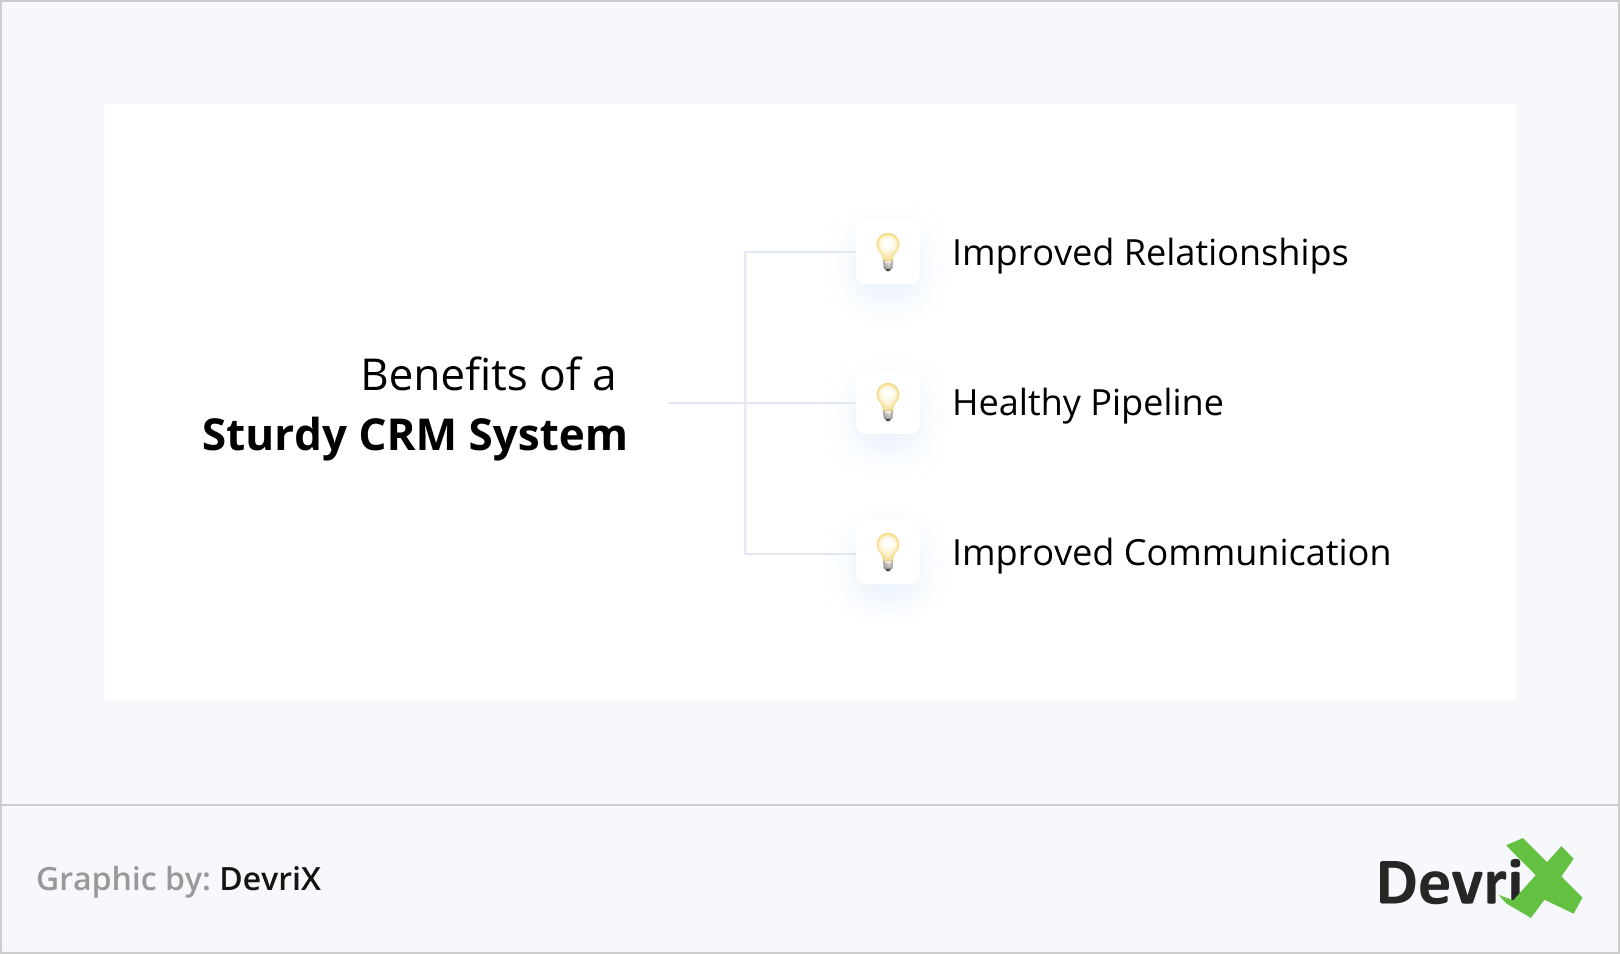 Benefits of a Sturdy CRM System